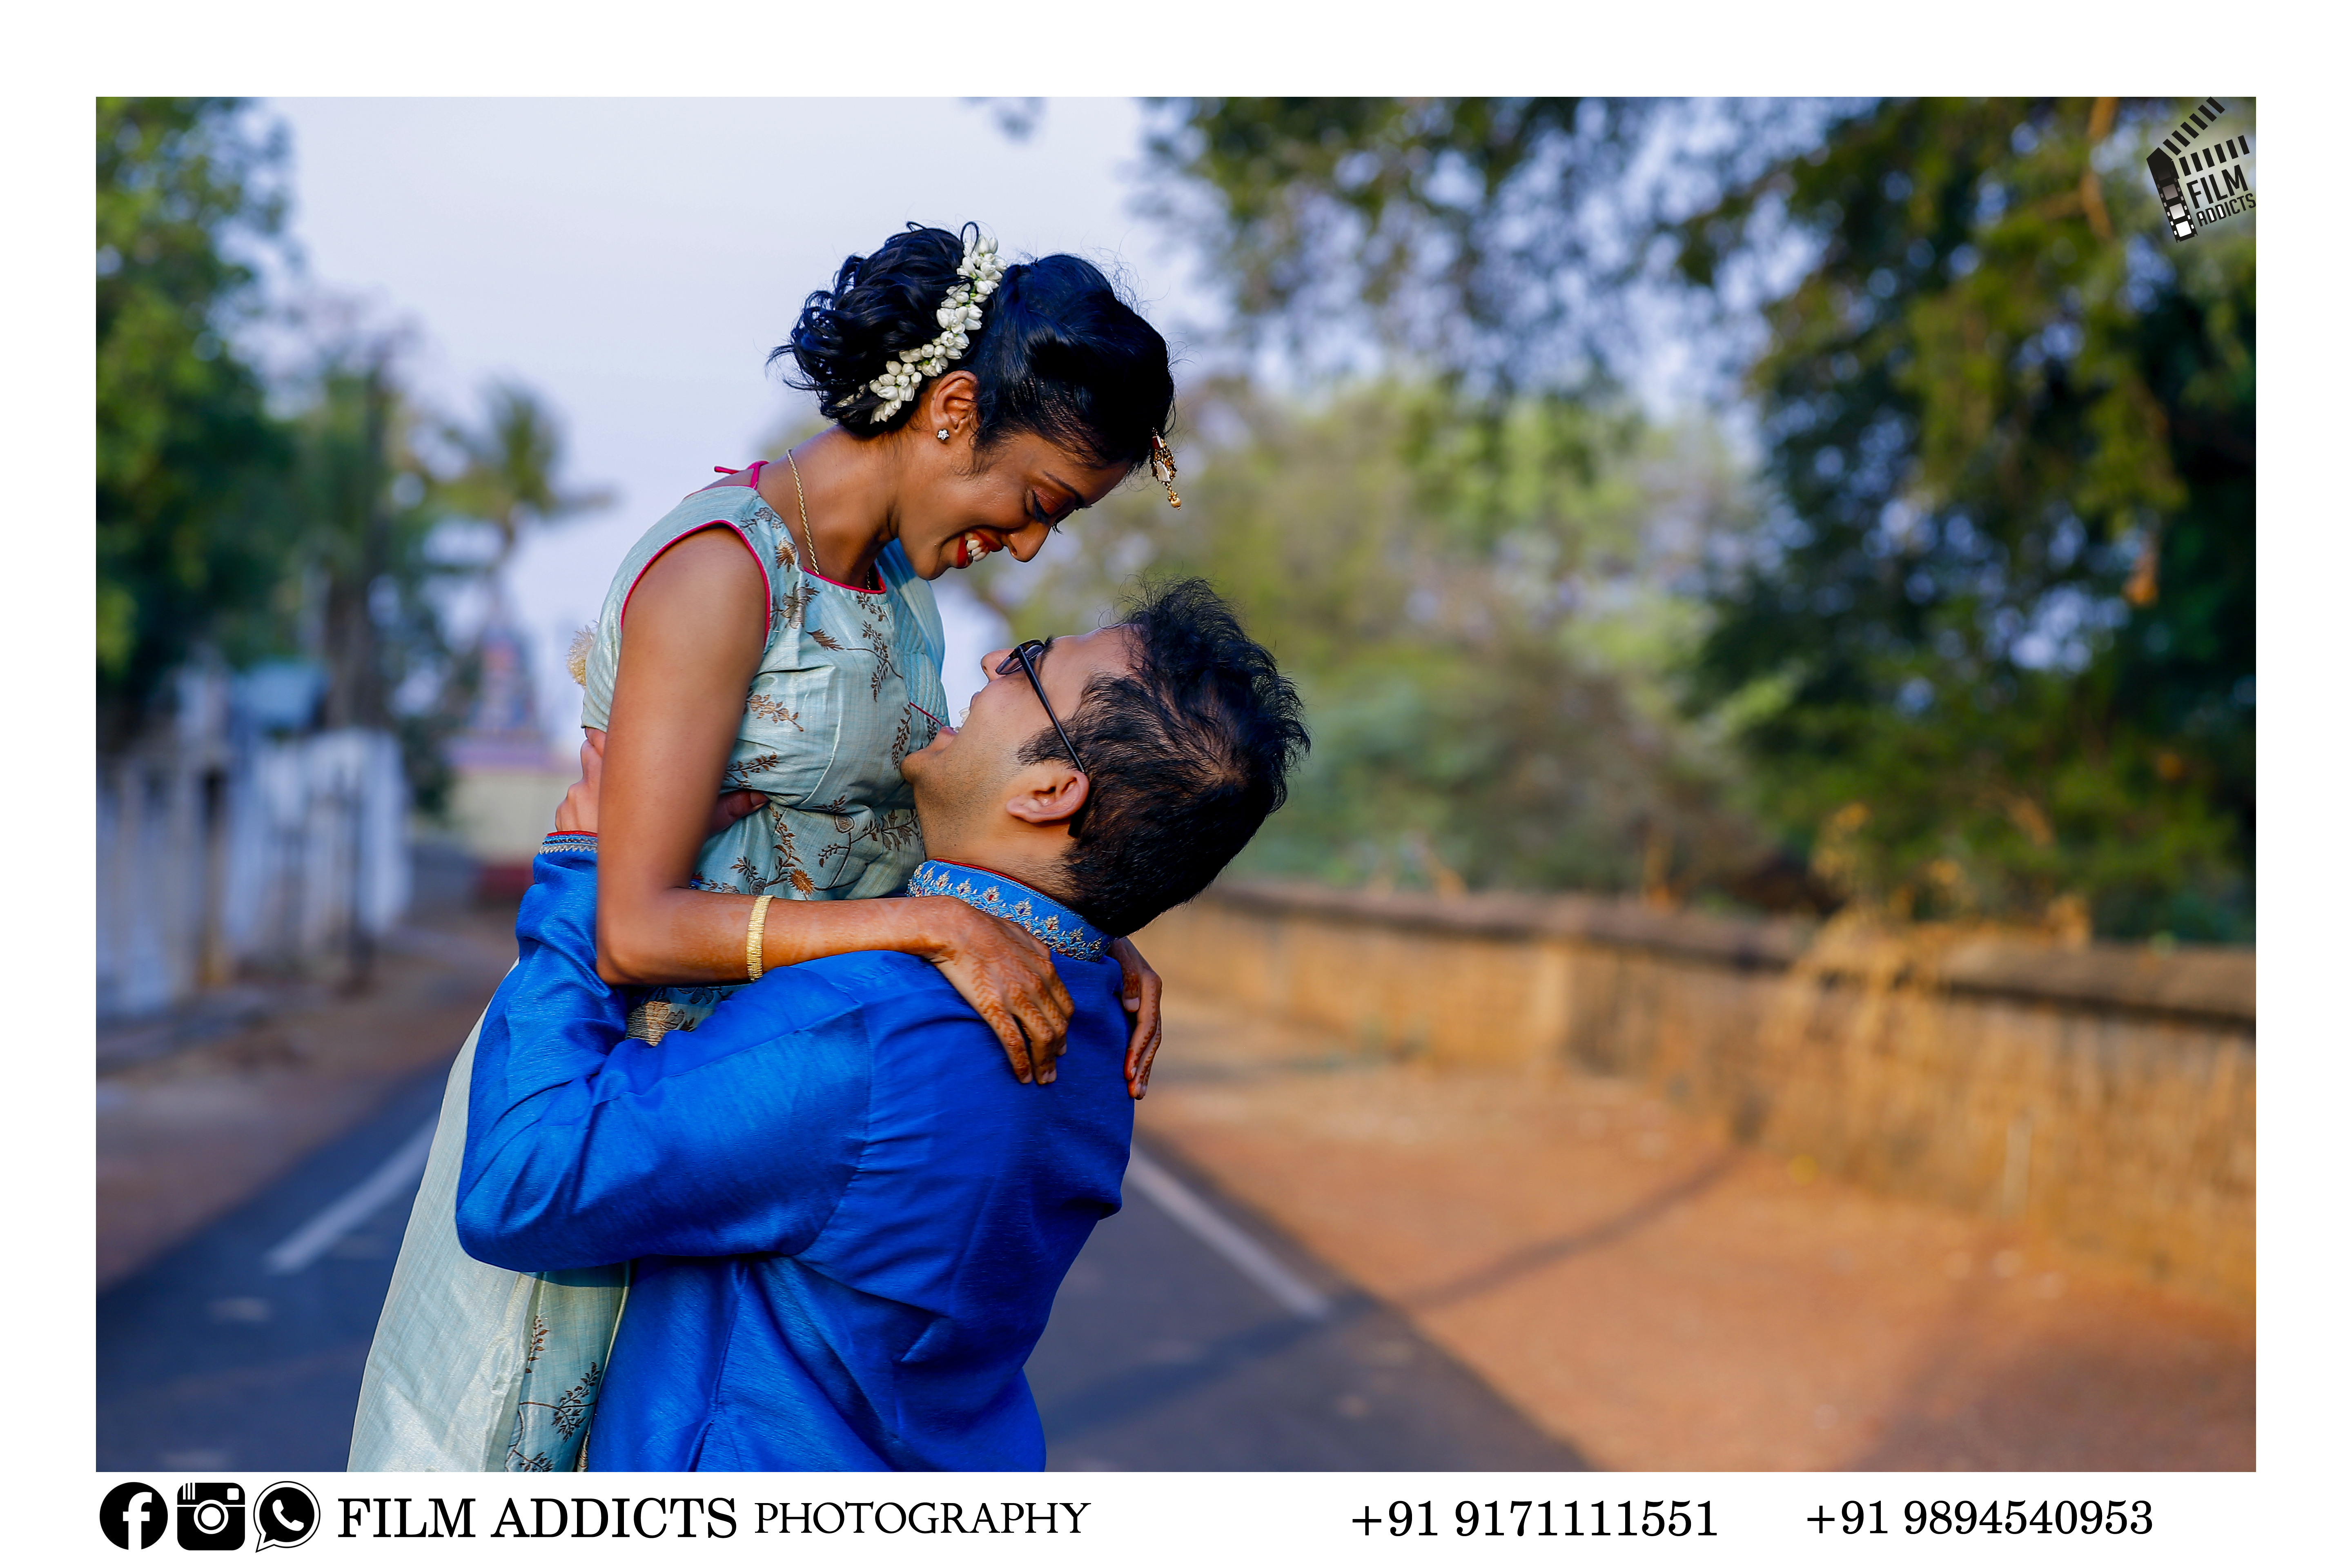 best-candid-photographers-in-Karaikudi,Candid-photography-in-Karaikudi,best-wedding -photography-in-Karaikudi,Best-candid-photography-in-Karaikudi,Best-candid-photographer,candid-photographer-in-Karaikudi,drone-photographer-in-Karaikudi,helicam-photographer-in-Karaikudi,candid-wedding-photographers-in-Karaikudi,photographers-in-Karaikudi,professional-wedding-photographers-in-Karaikudi,top-wedding-filmmakers-in-Karaikudi,wedding-cinematographers-in-Karaikudi,wedding-cinimatography-in-Karaikudi,wedding-photographers-in-Karaikudi,wedding-teaser-in-Karaikudi,asian-wedding-photography-in-Karaikudi,best-candid-photographers-in-Karaikudi,best-candid-videographers-in-Karaikudi,best-photographers-in-Karaikudi,best-wedding-photographers-in-Karaikudi,best-nadar-wedding-photography-in-Karaikudi,candid-photographers-in-Karaikudi,destination-wedding-photographers-in-Karaikudi,fashion-photographers-in-Karaikudi, Karaikudi-famous-stage-decorations